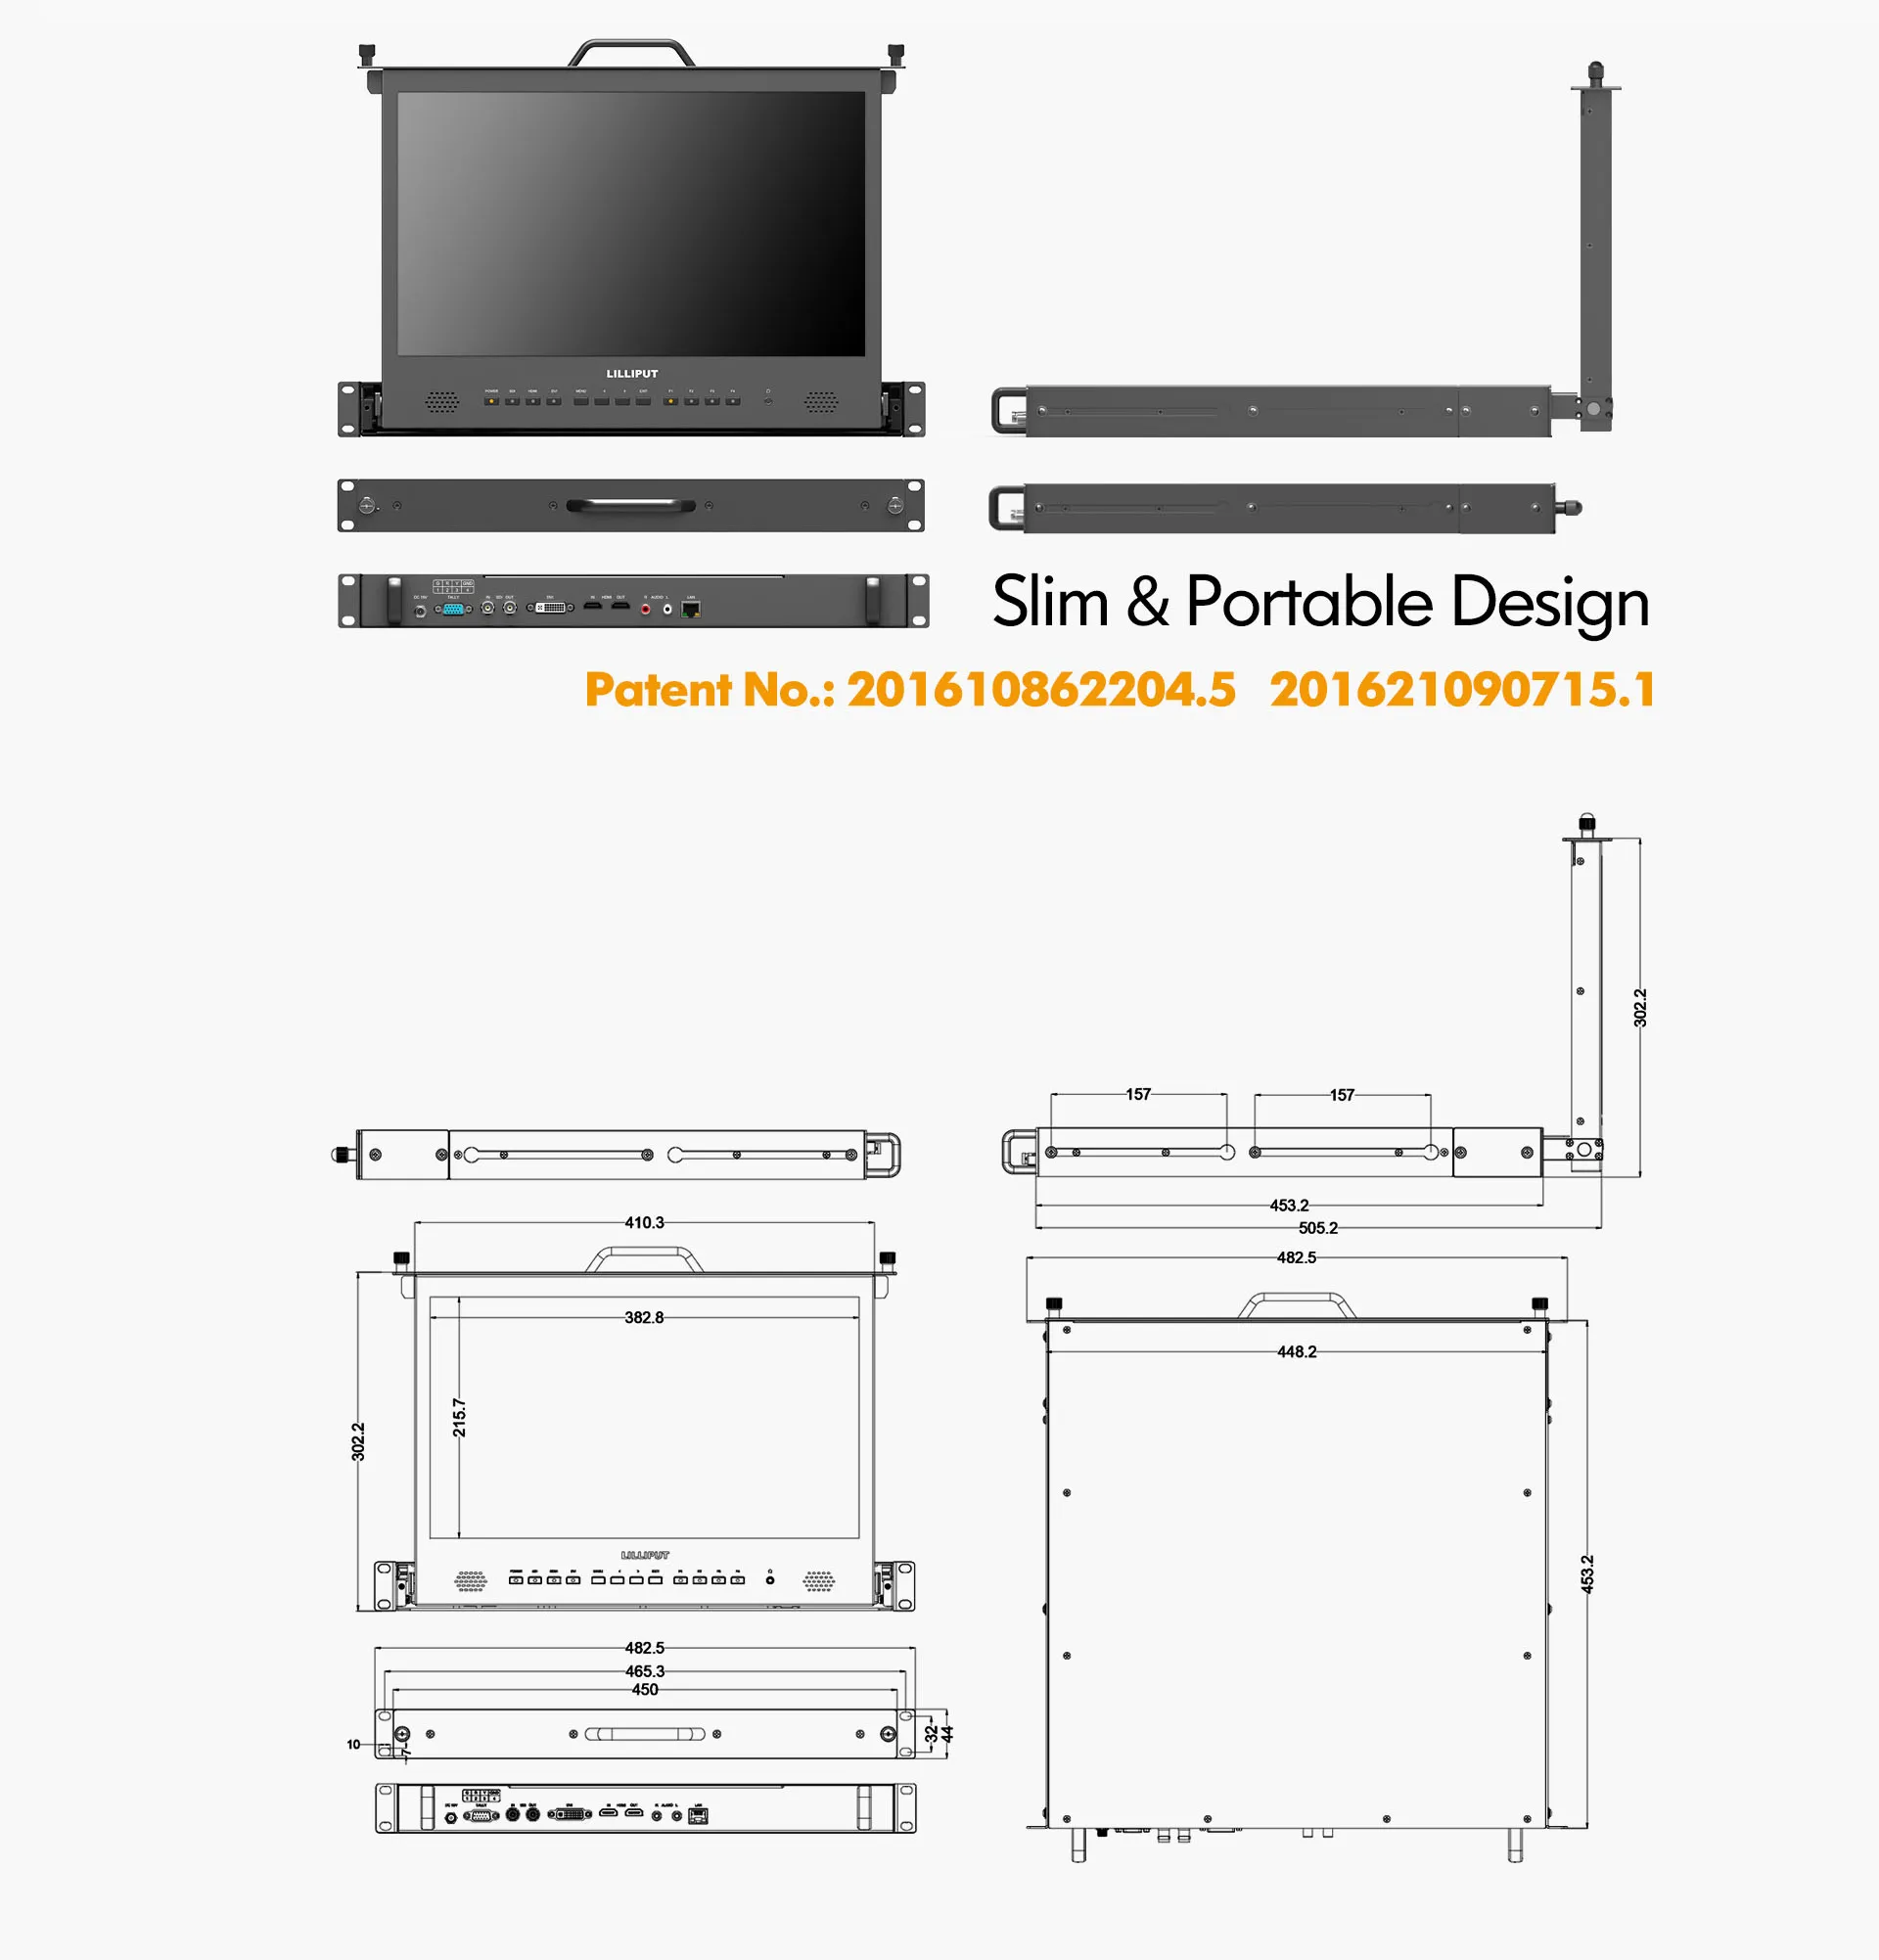 17.3 inch Pull-out rackmount monitor